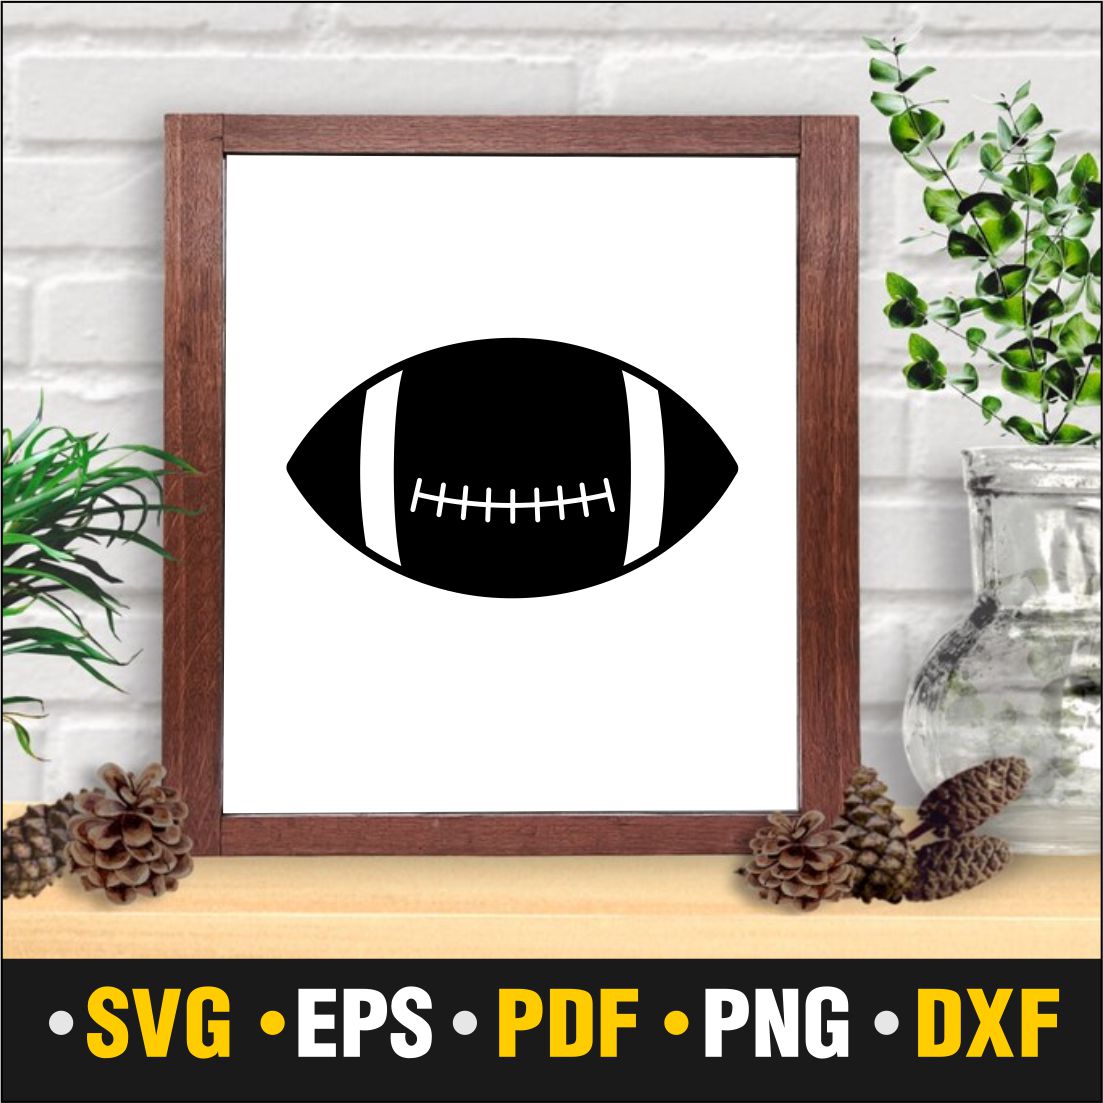 Unique silhouette image of the Rugby Ball in a wooden frame